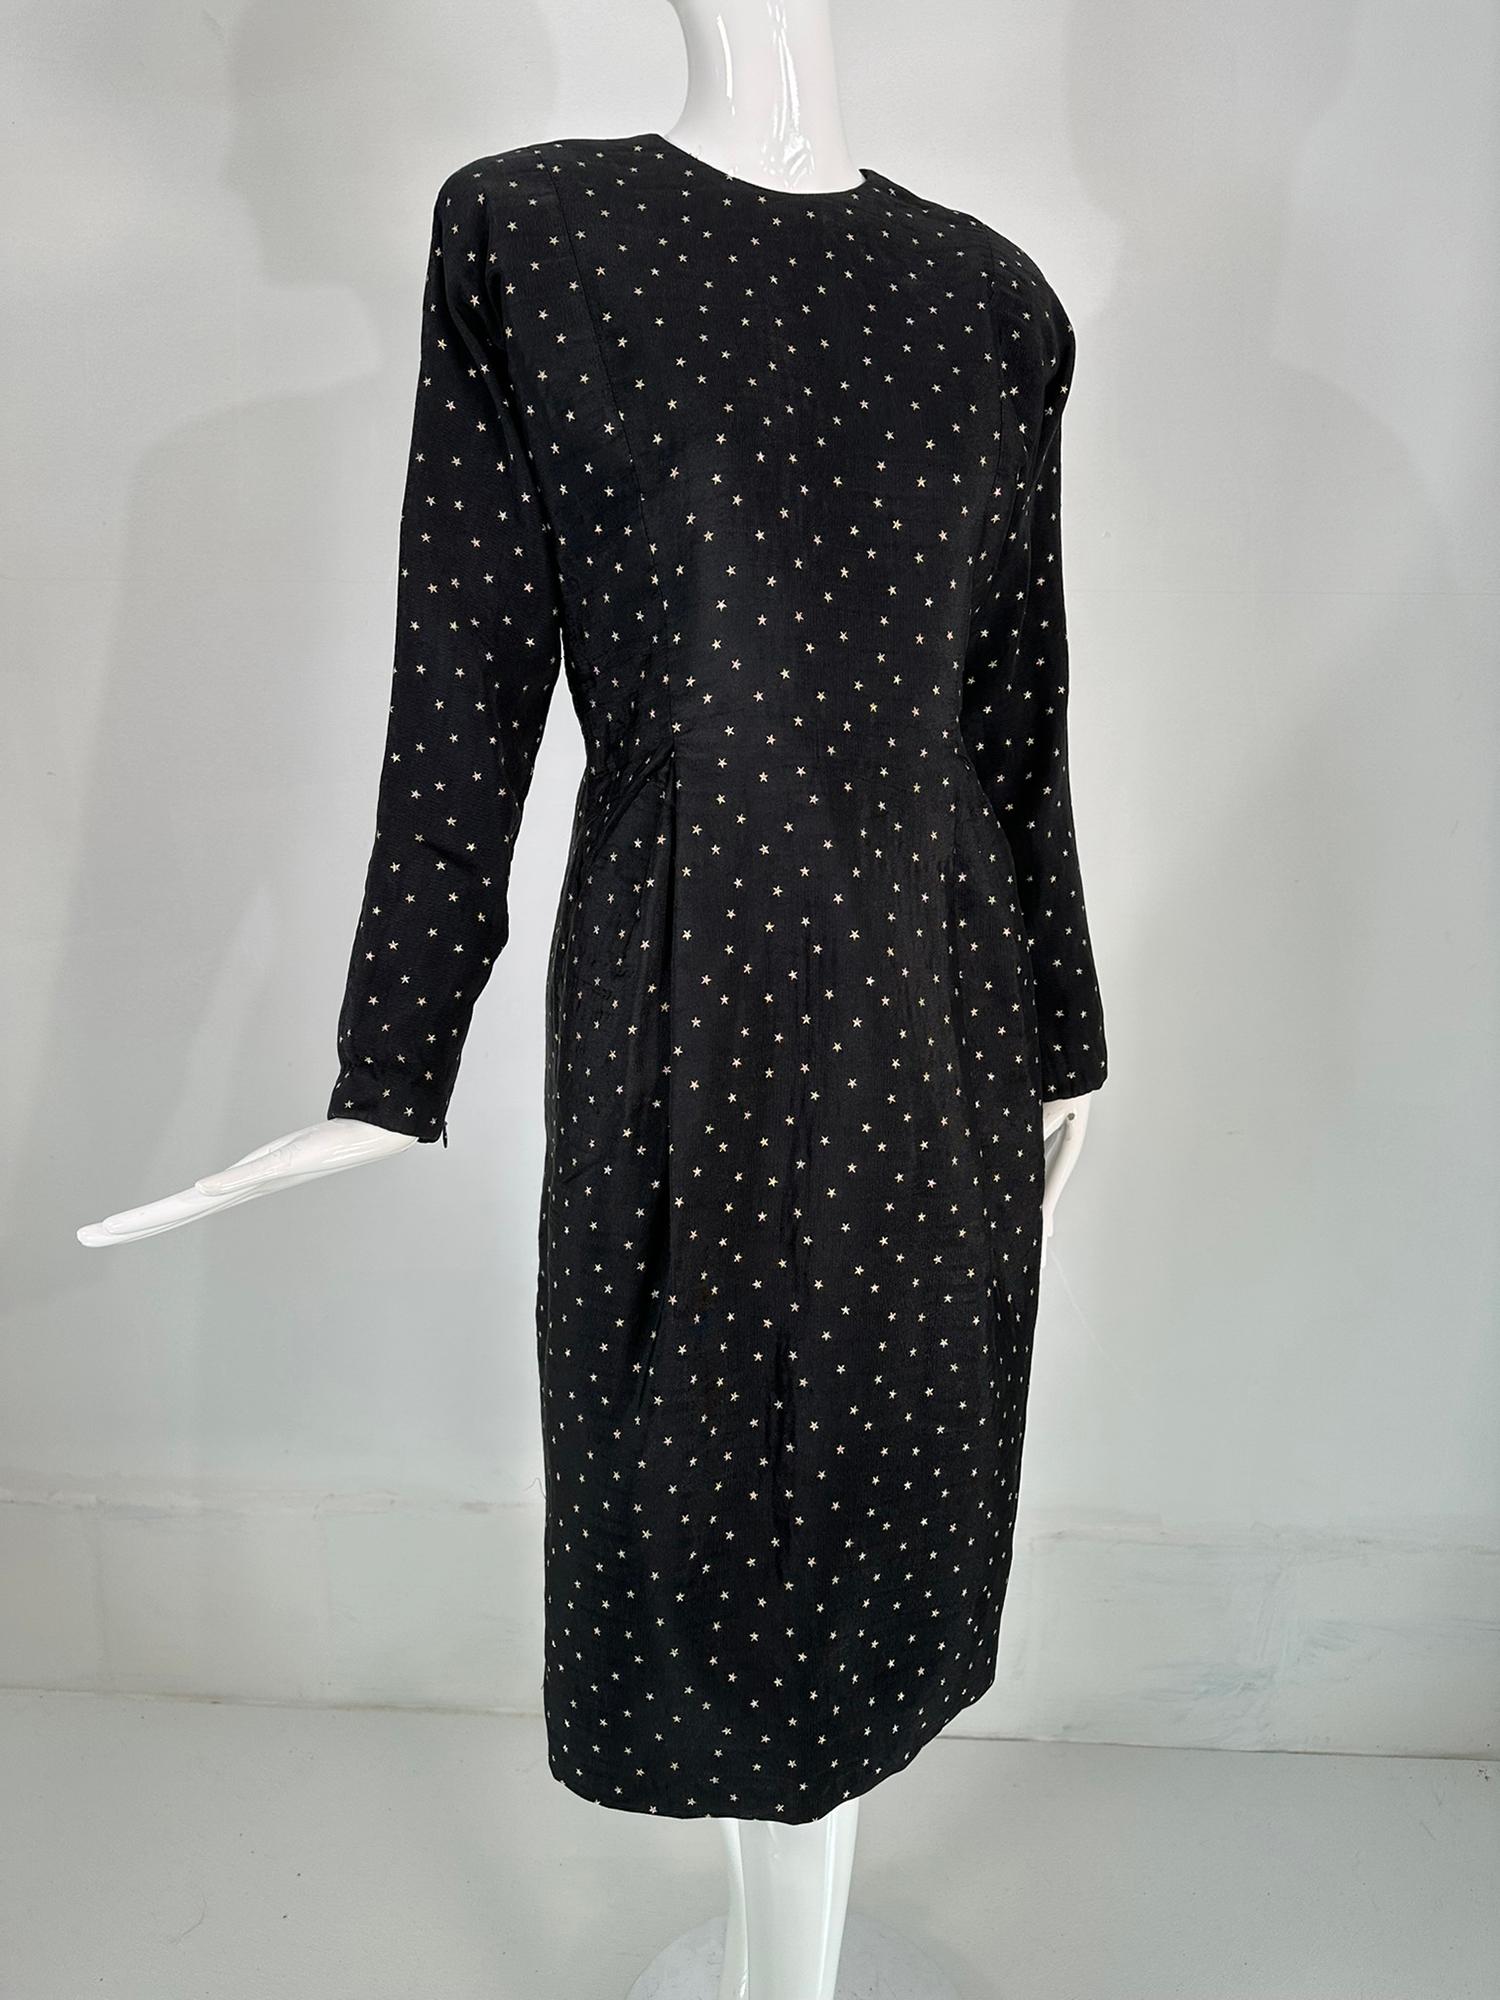 Geoffrey Beene embroidered gold stars on black faille button back dress from the 1980s. Geoffrey Beene's clothing is sophisticated with a bit of whimsy, his fabric choices, mix & match prints with textures and gorgeous silks, wool,  linens, you name